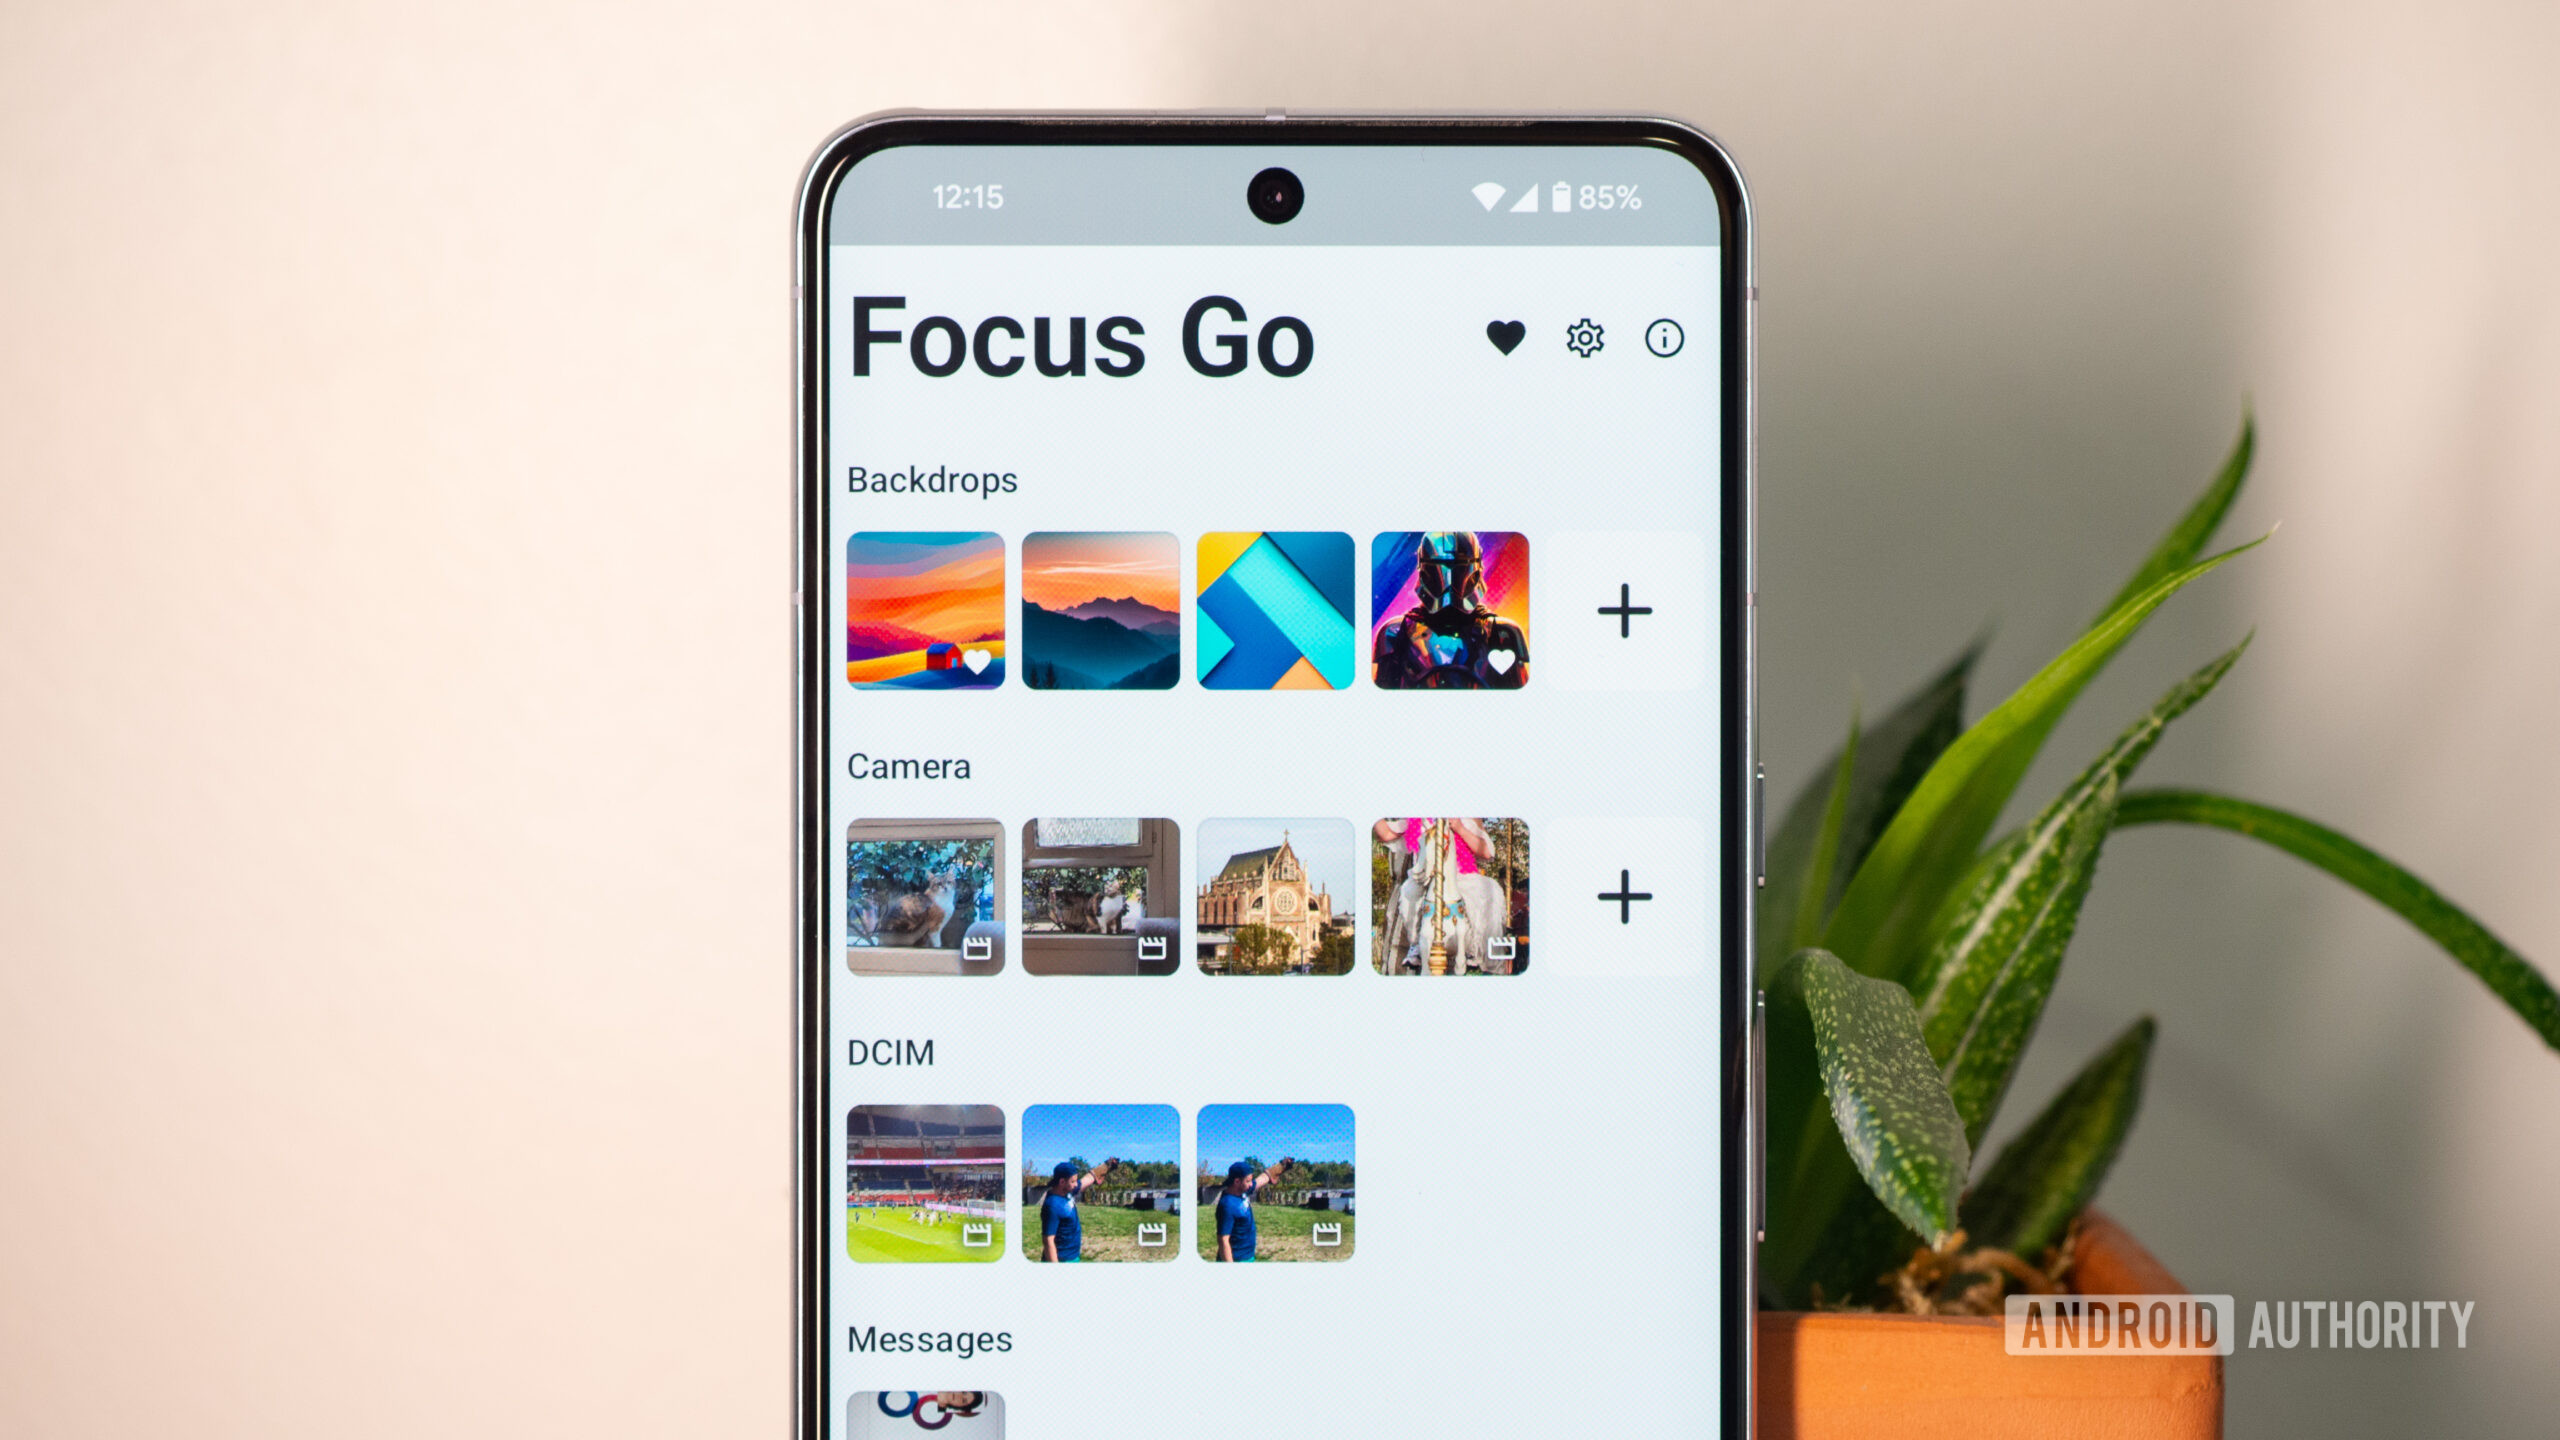 Focus Go is the free photo gallery app I’ve always wanted